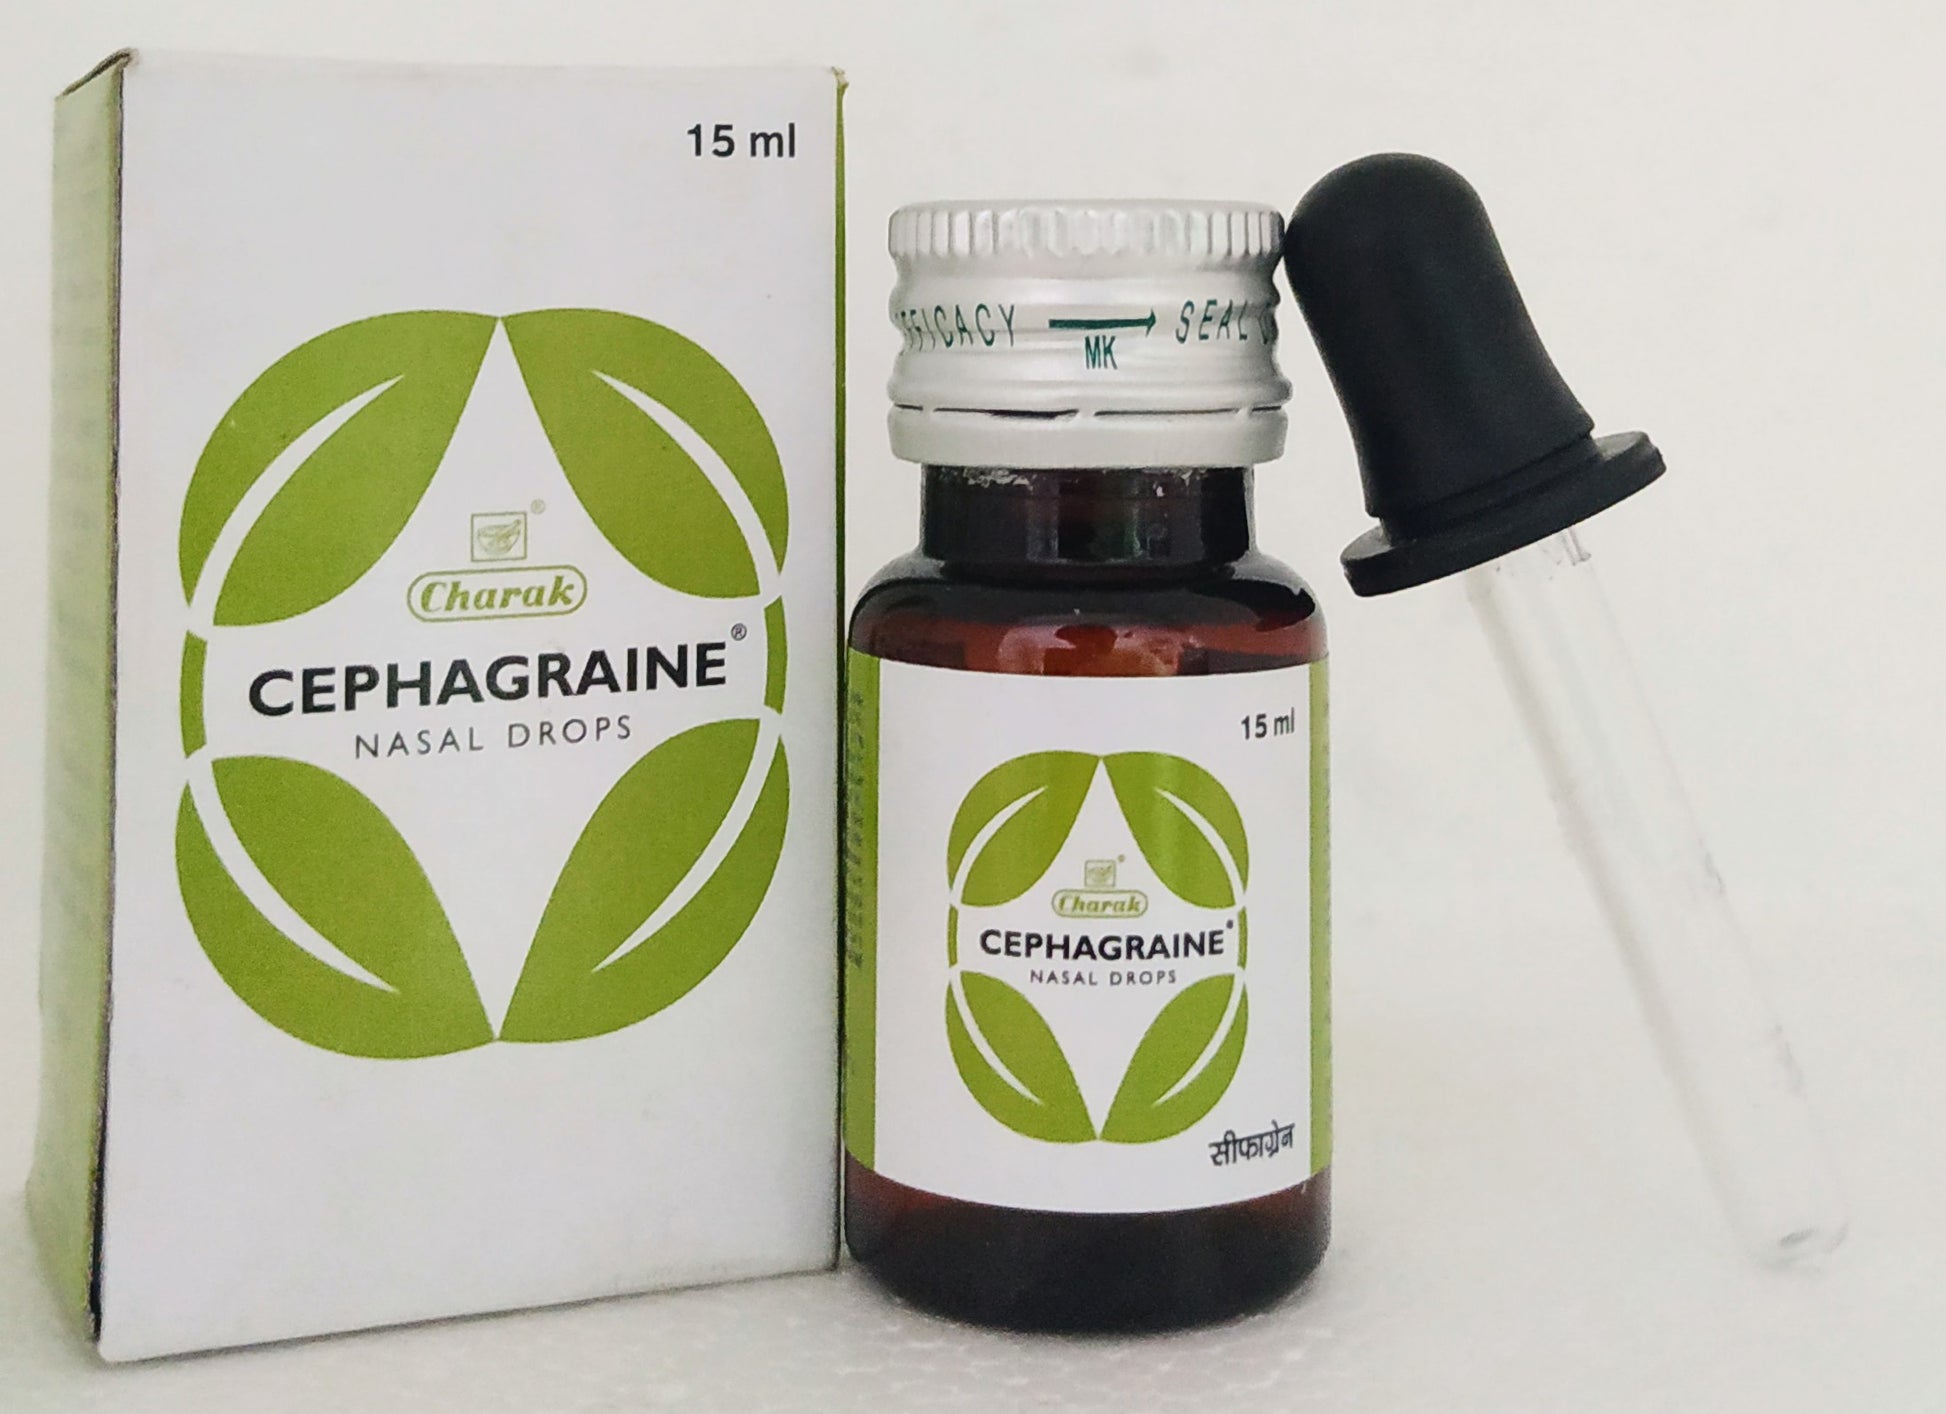 Shop Cephagraine Drops 15ml at price 55.00 from Charak Online - Ayush Care